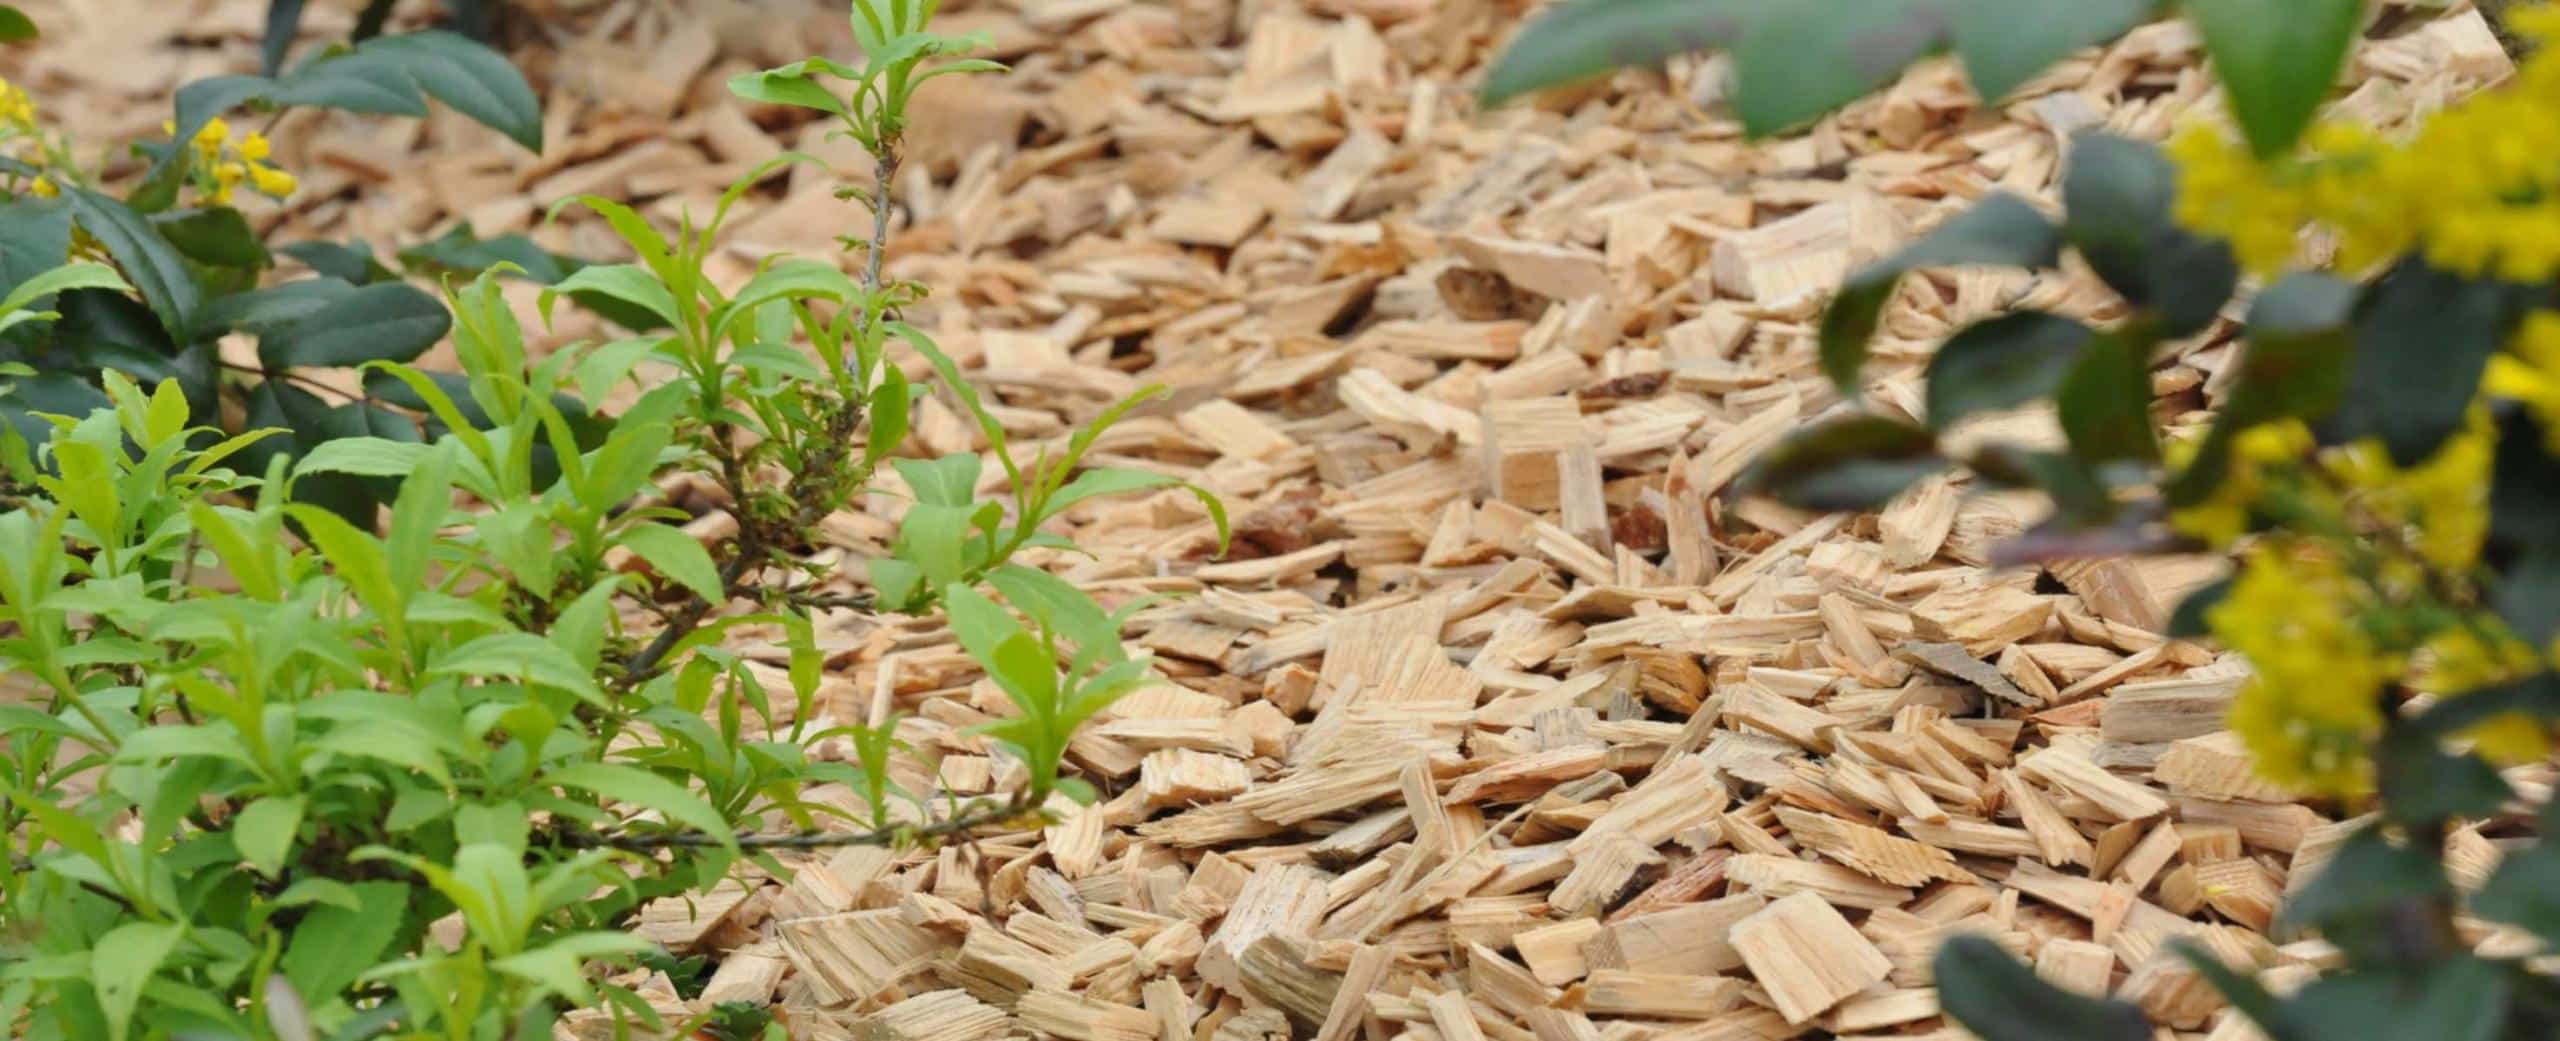 Wood Chip Mulch Perfect For Growing Beds To Enrich Soil Recycle